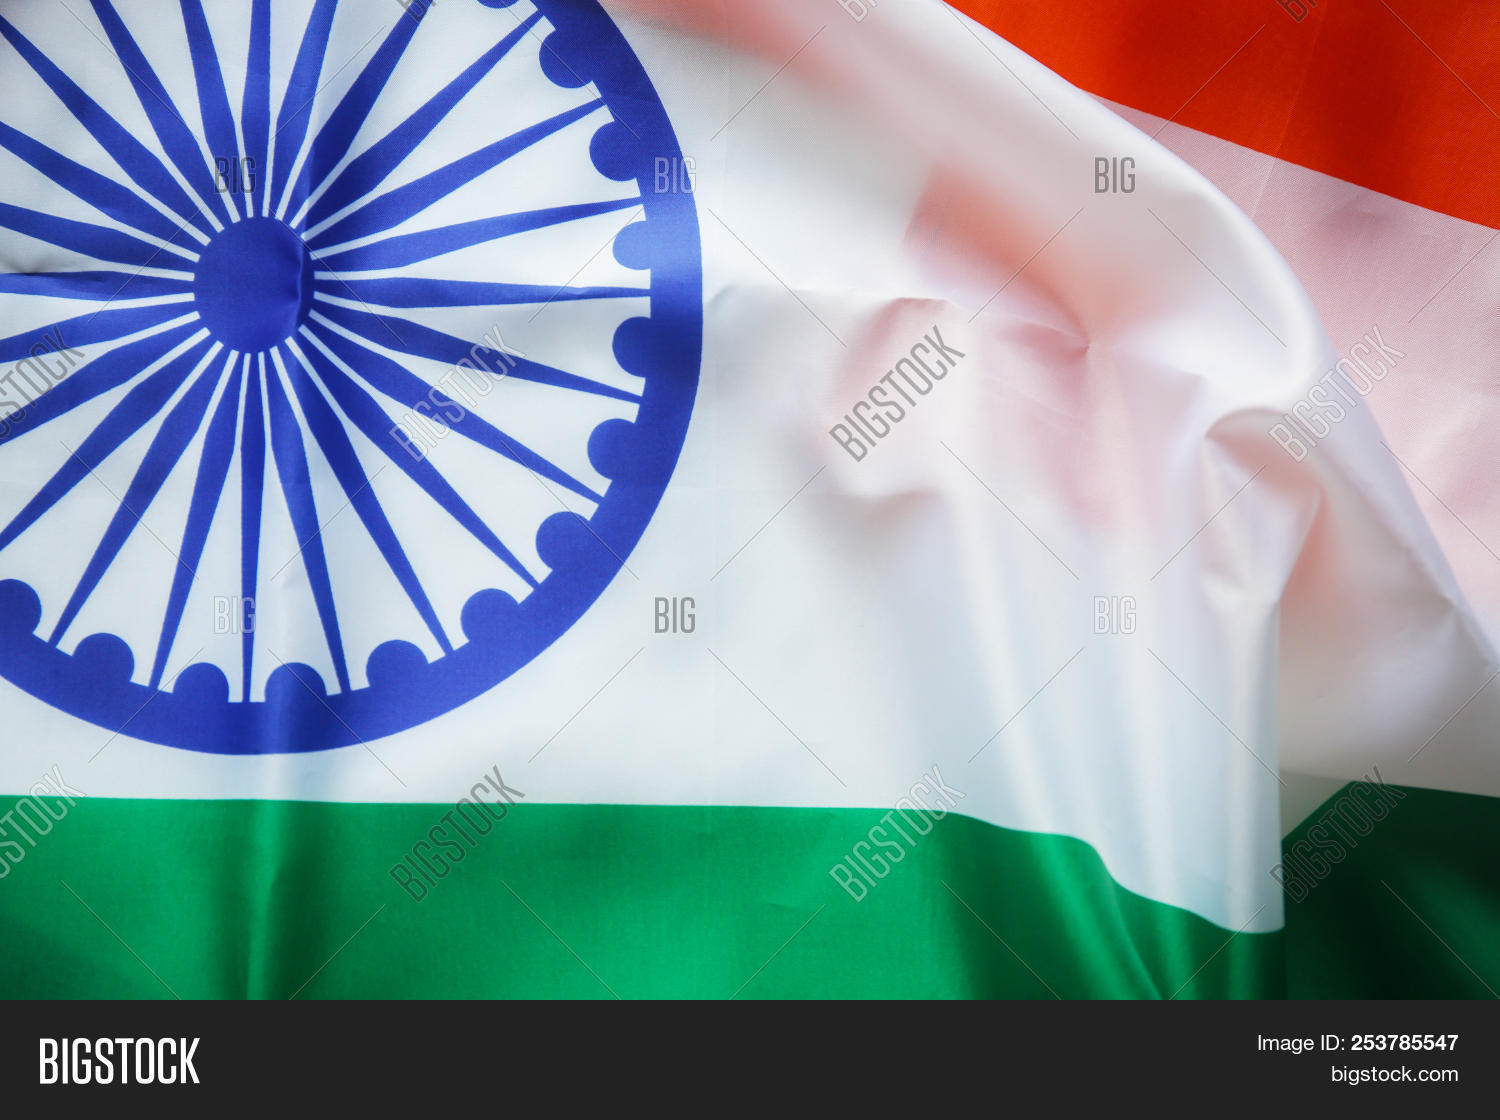 15 26 January Banner Background 643866 Hd Wallpaper Backgrounds Download These all republic day indian editing background are new with latest with very good time, we start providing and updating for this 26 january editing background cb png background for this indian republic day which is to. 15 26 january banner background